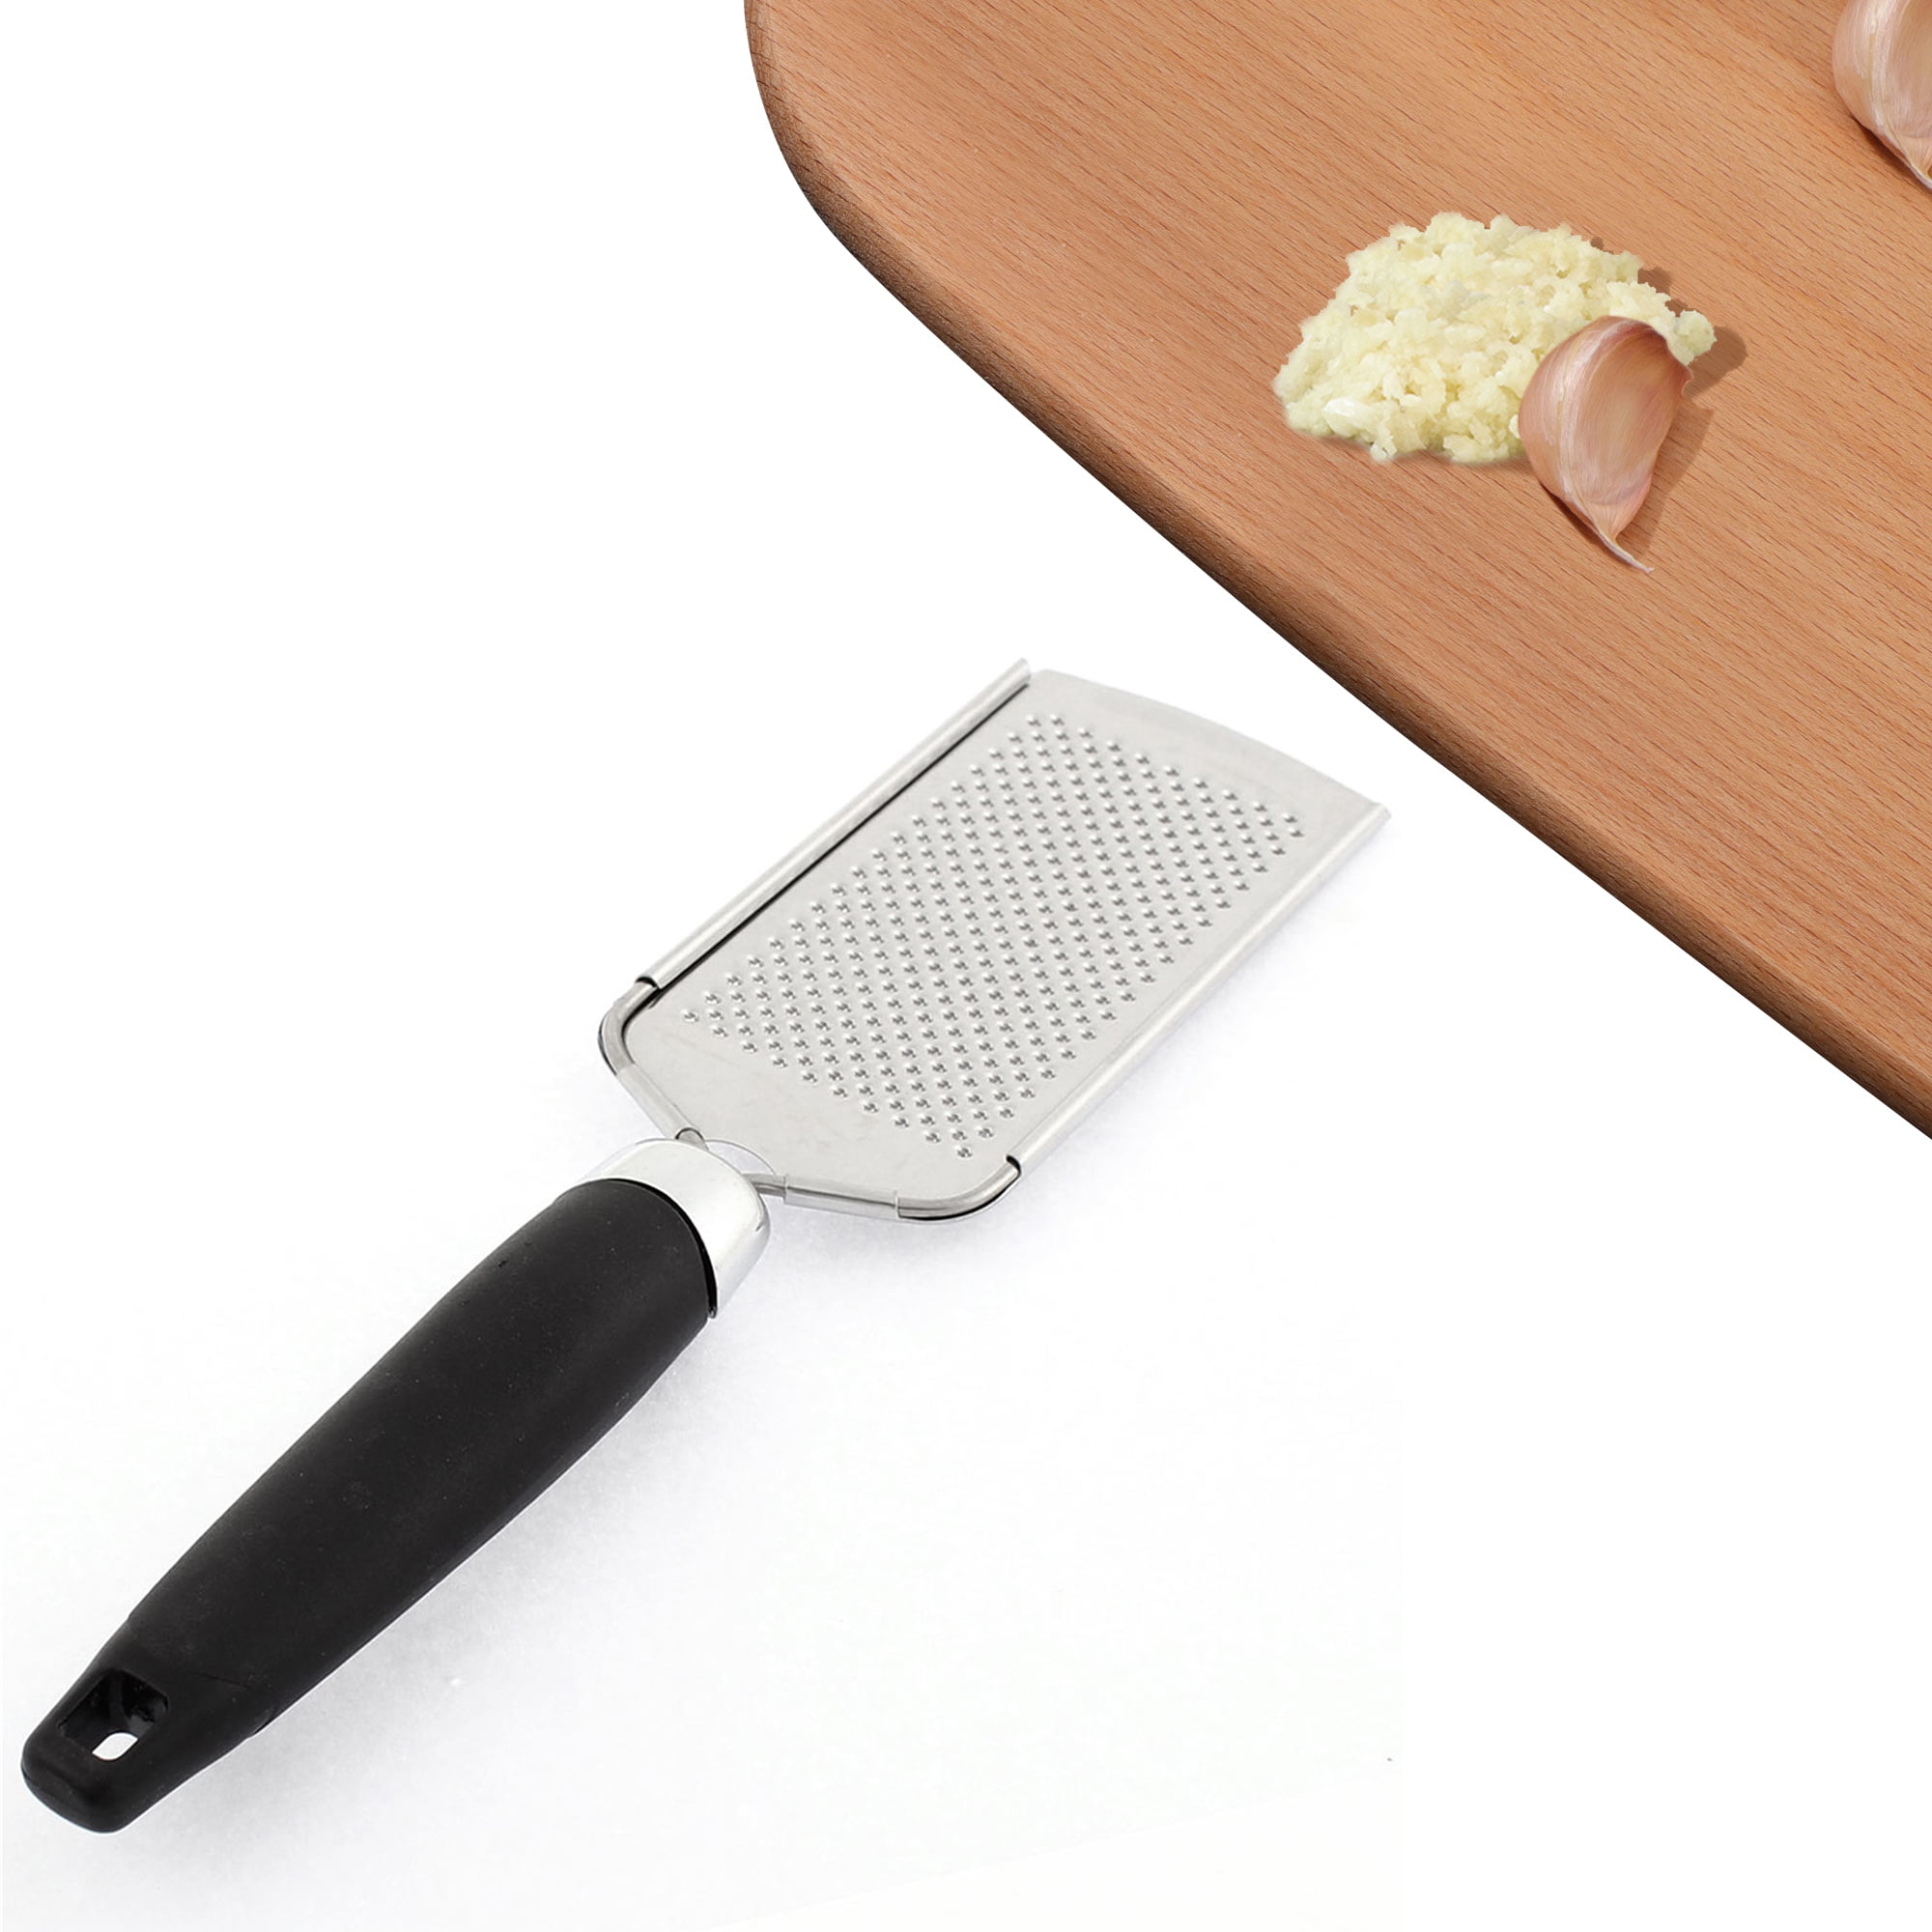 Dosaele Stainless Steel Handheld Cheese Grater – Comfort Non-Slip Handle  and Razor Sharp Blades – Easily Grates All Types of Cheeses, Fruits